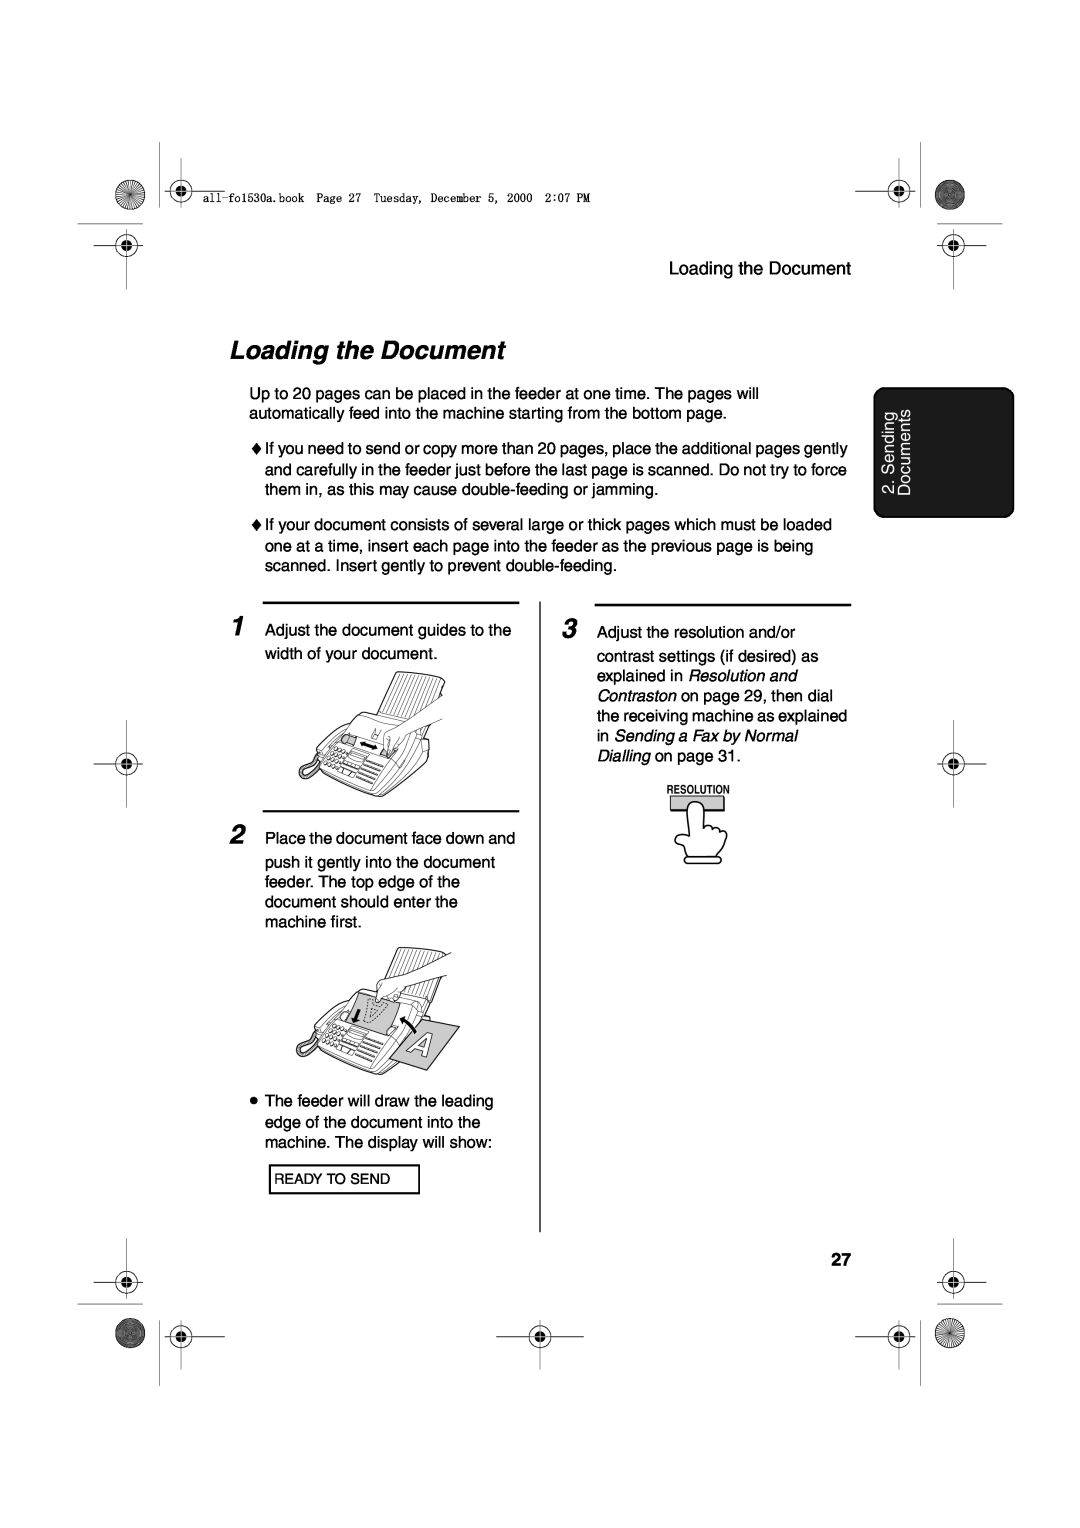 Sharp FO-1530 operation manual Loading the Document, Sending Documents 